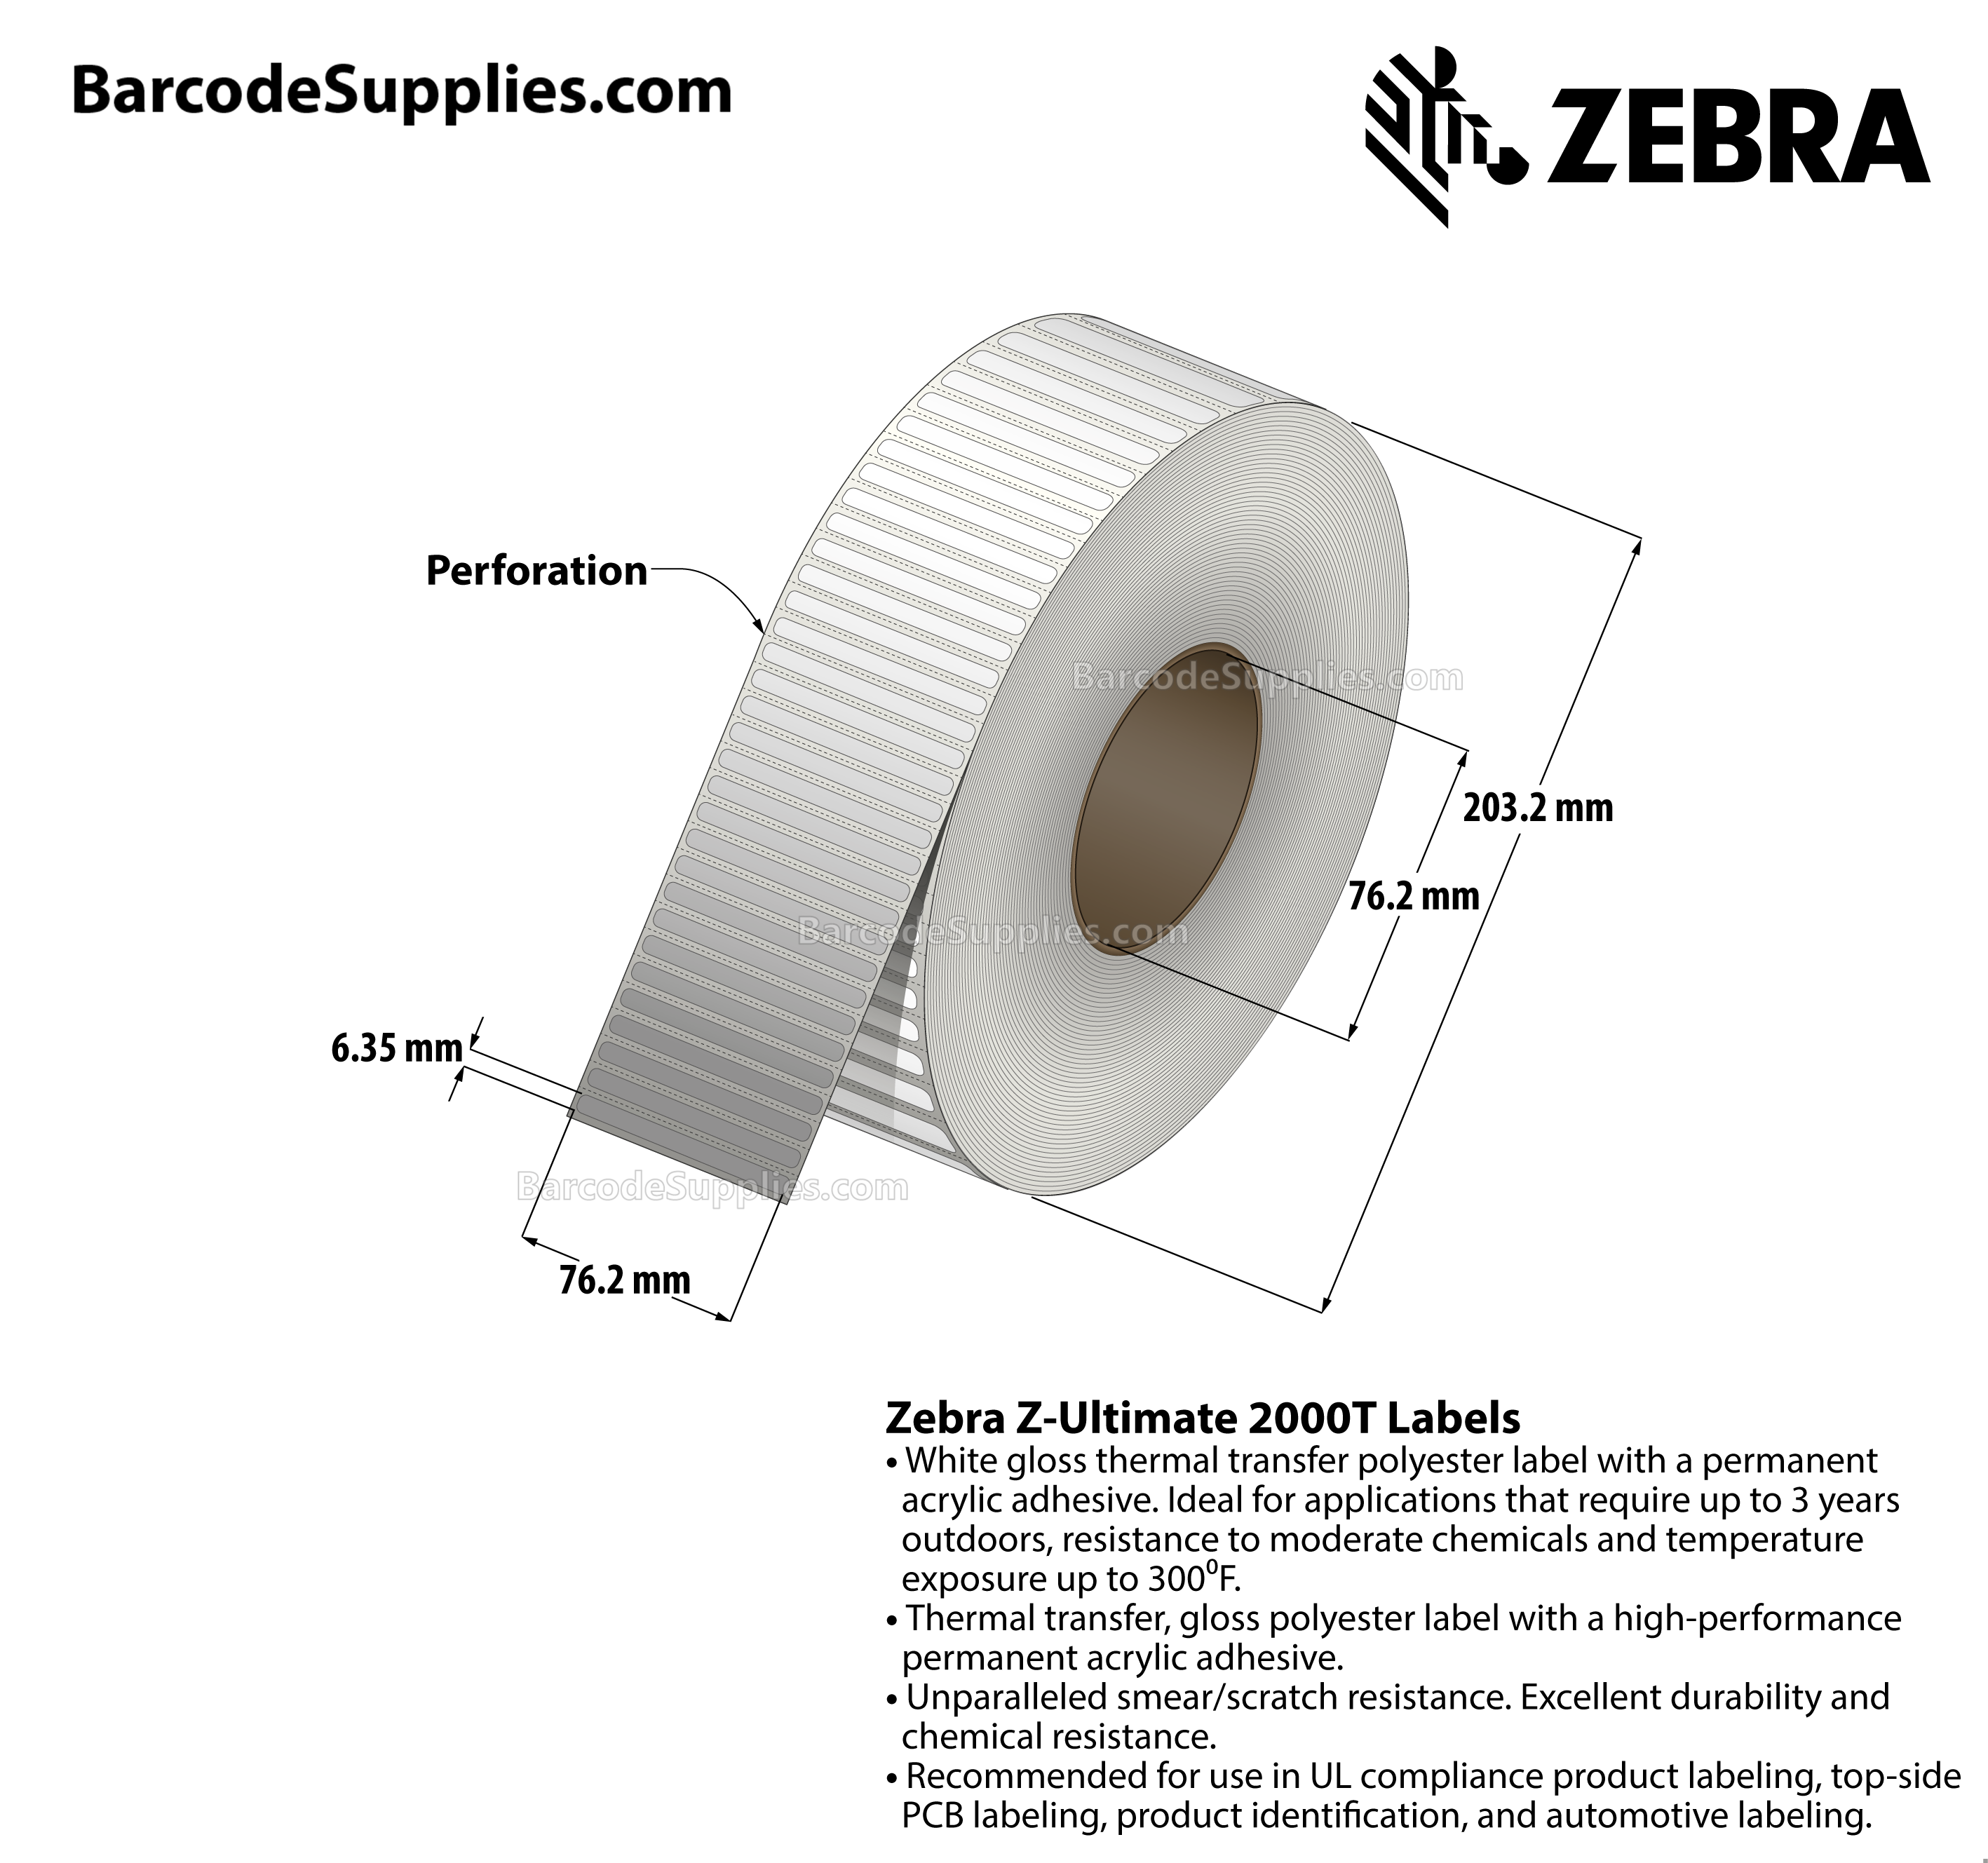 3 x 0.25 Thermal Transfer White Z-Ultimate 2000T Labels With Permanent Adhesive - Perforated - 2500 Labels Per Roll - Carton Of 1 Rolls - 2500 Labels Total - MPN: 10023038